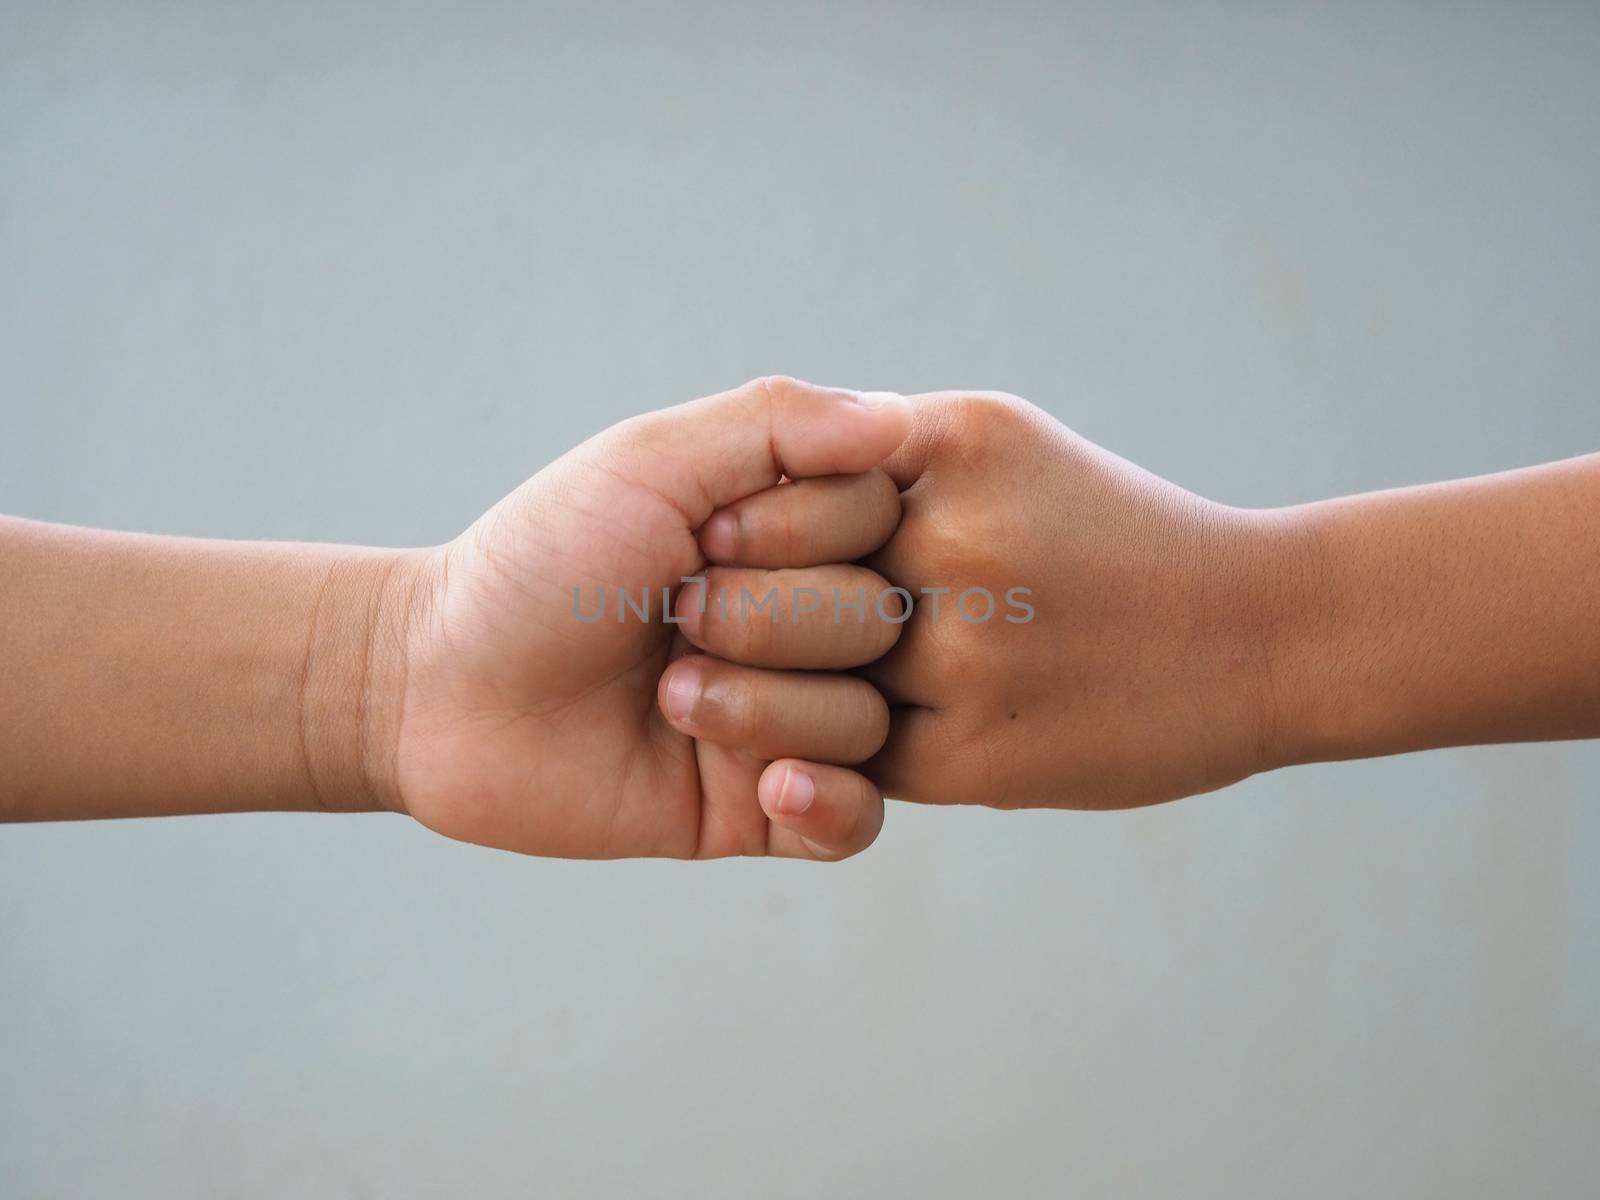 Boy fist bumping On a gray background.
It is a new greeting during the Covid virus epidemic prevention. clipping path.
new normal concept.